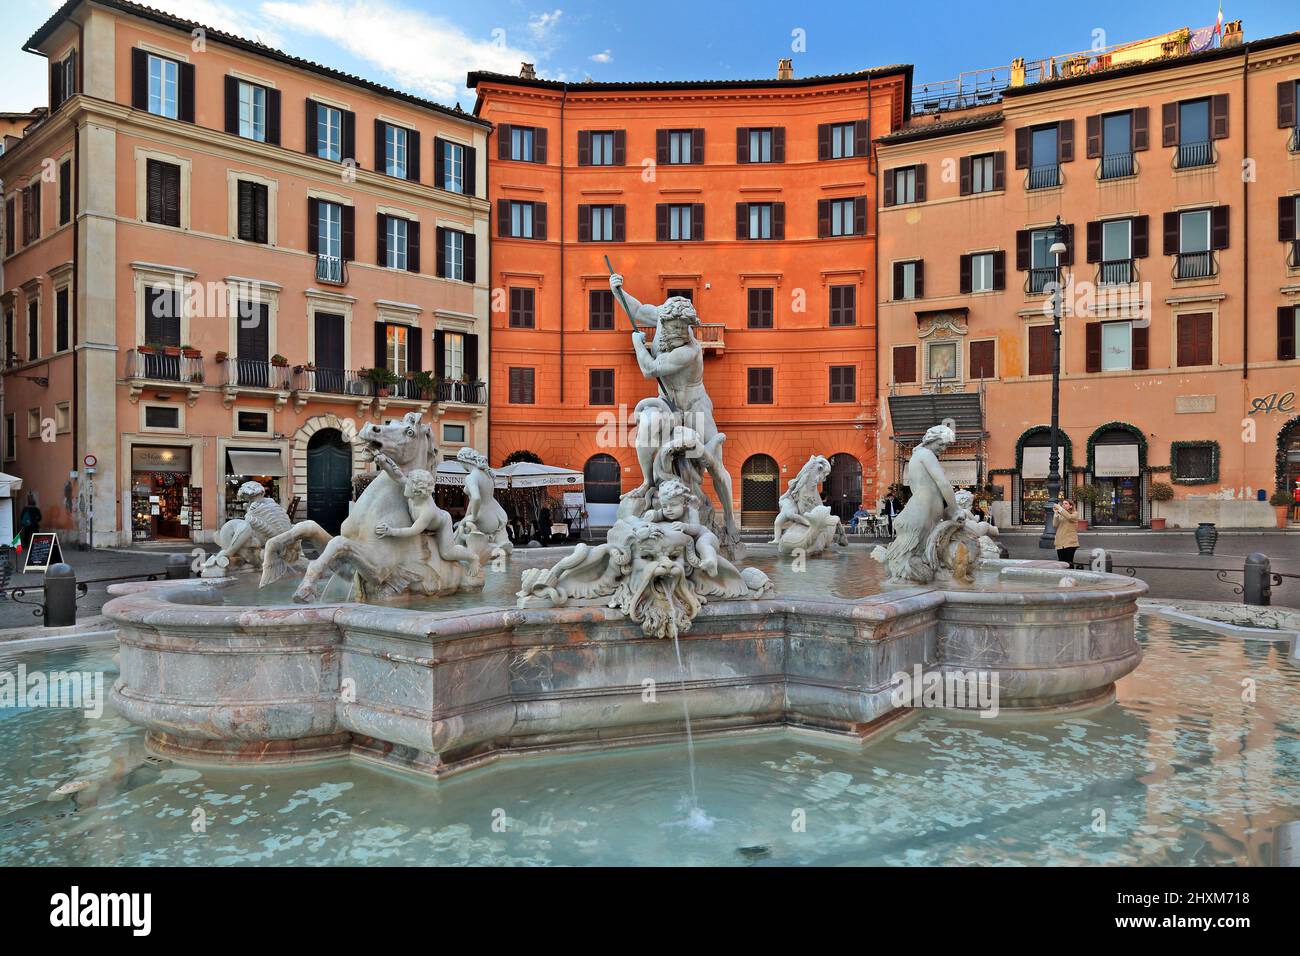 Fountain of Neptune at Piazza Navona, Rome, Italy. The Greek god Neptune is fighting with an octopus, framed by other mythological sculptures. Stock Photo